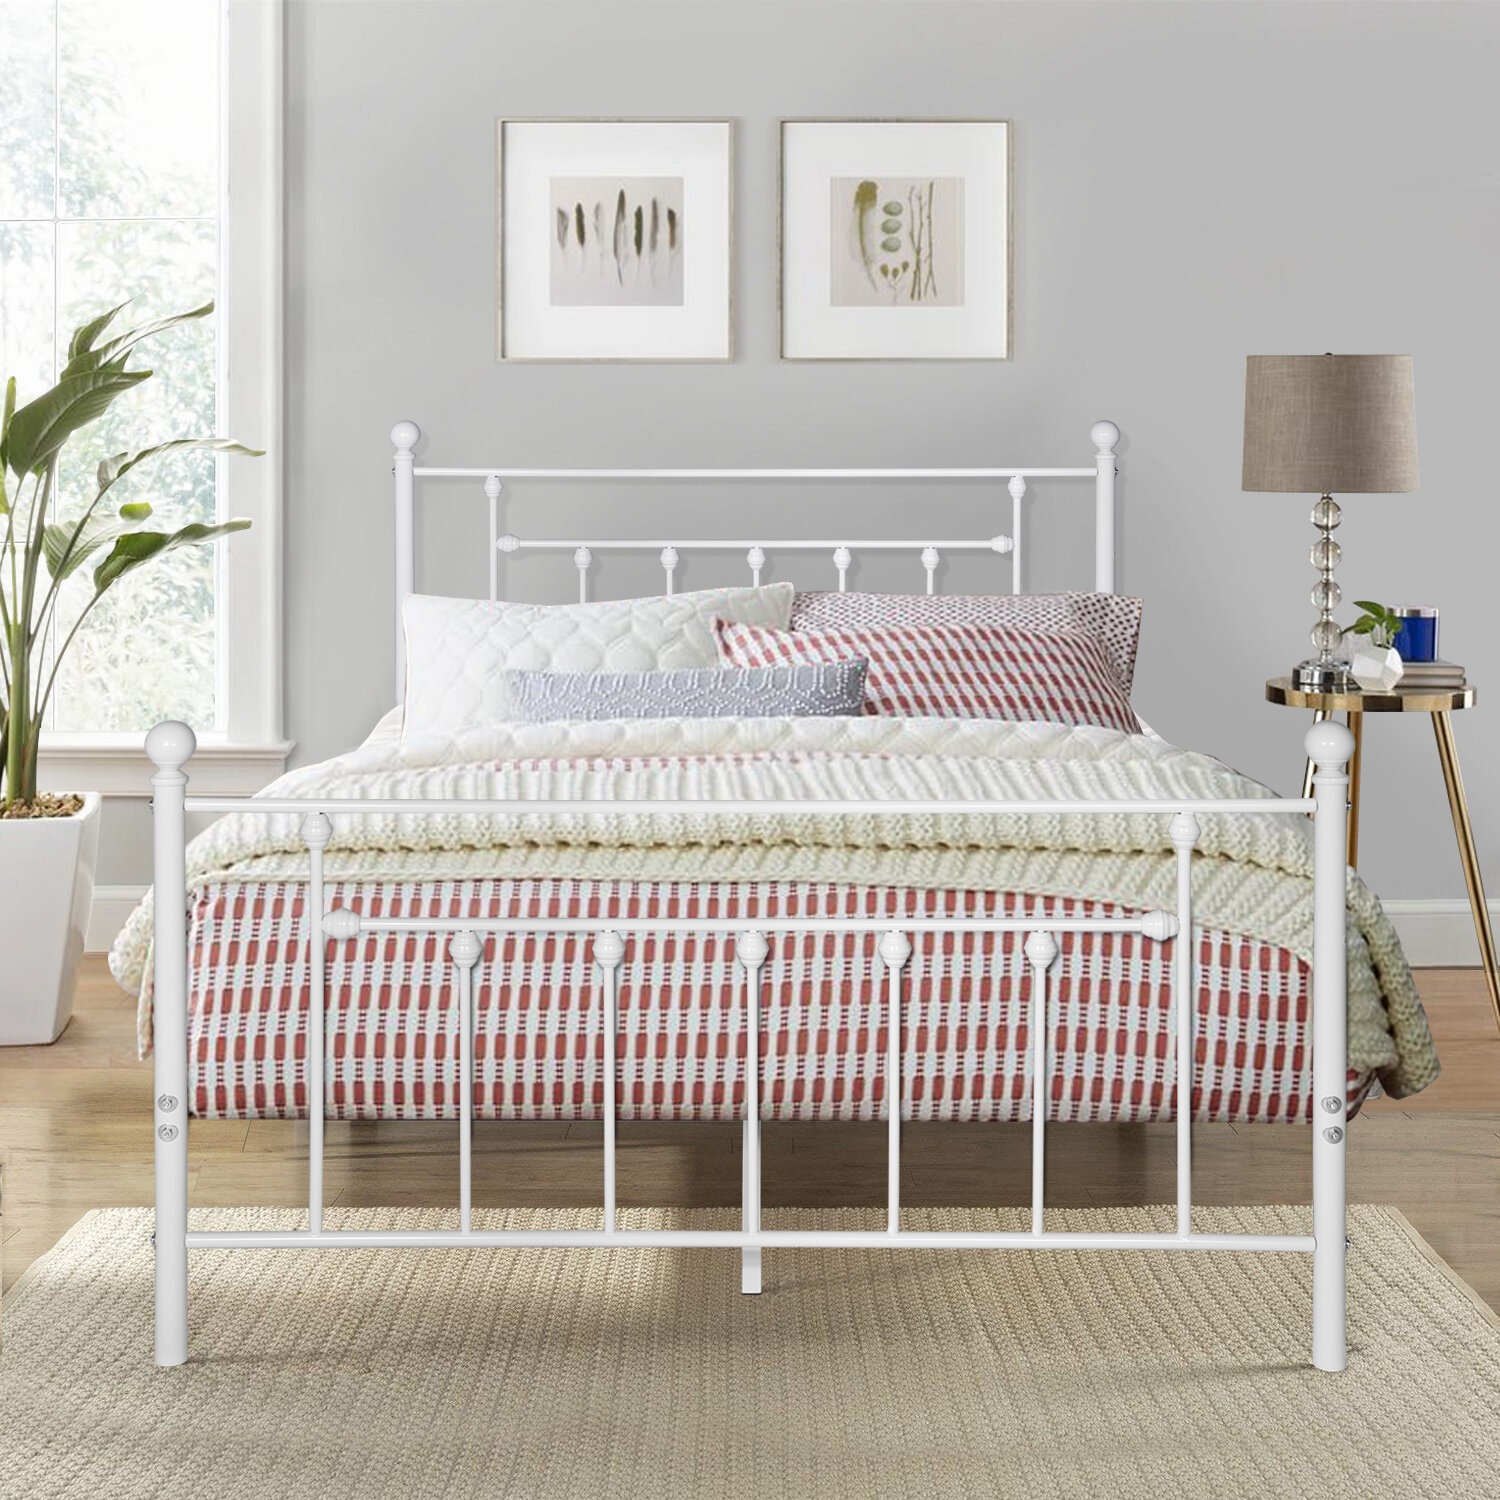 Coastal White Beds You Ll Love In 2021 Wayfair